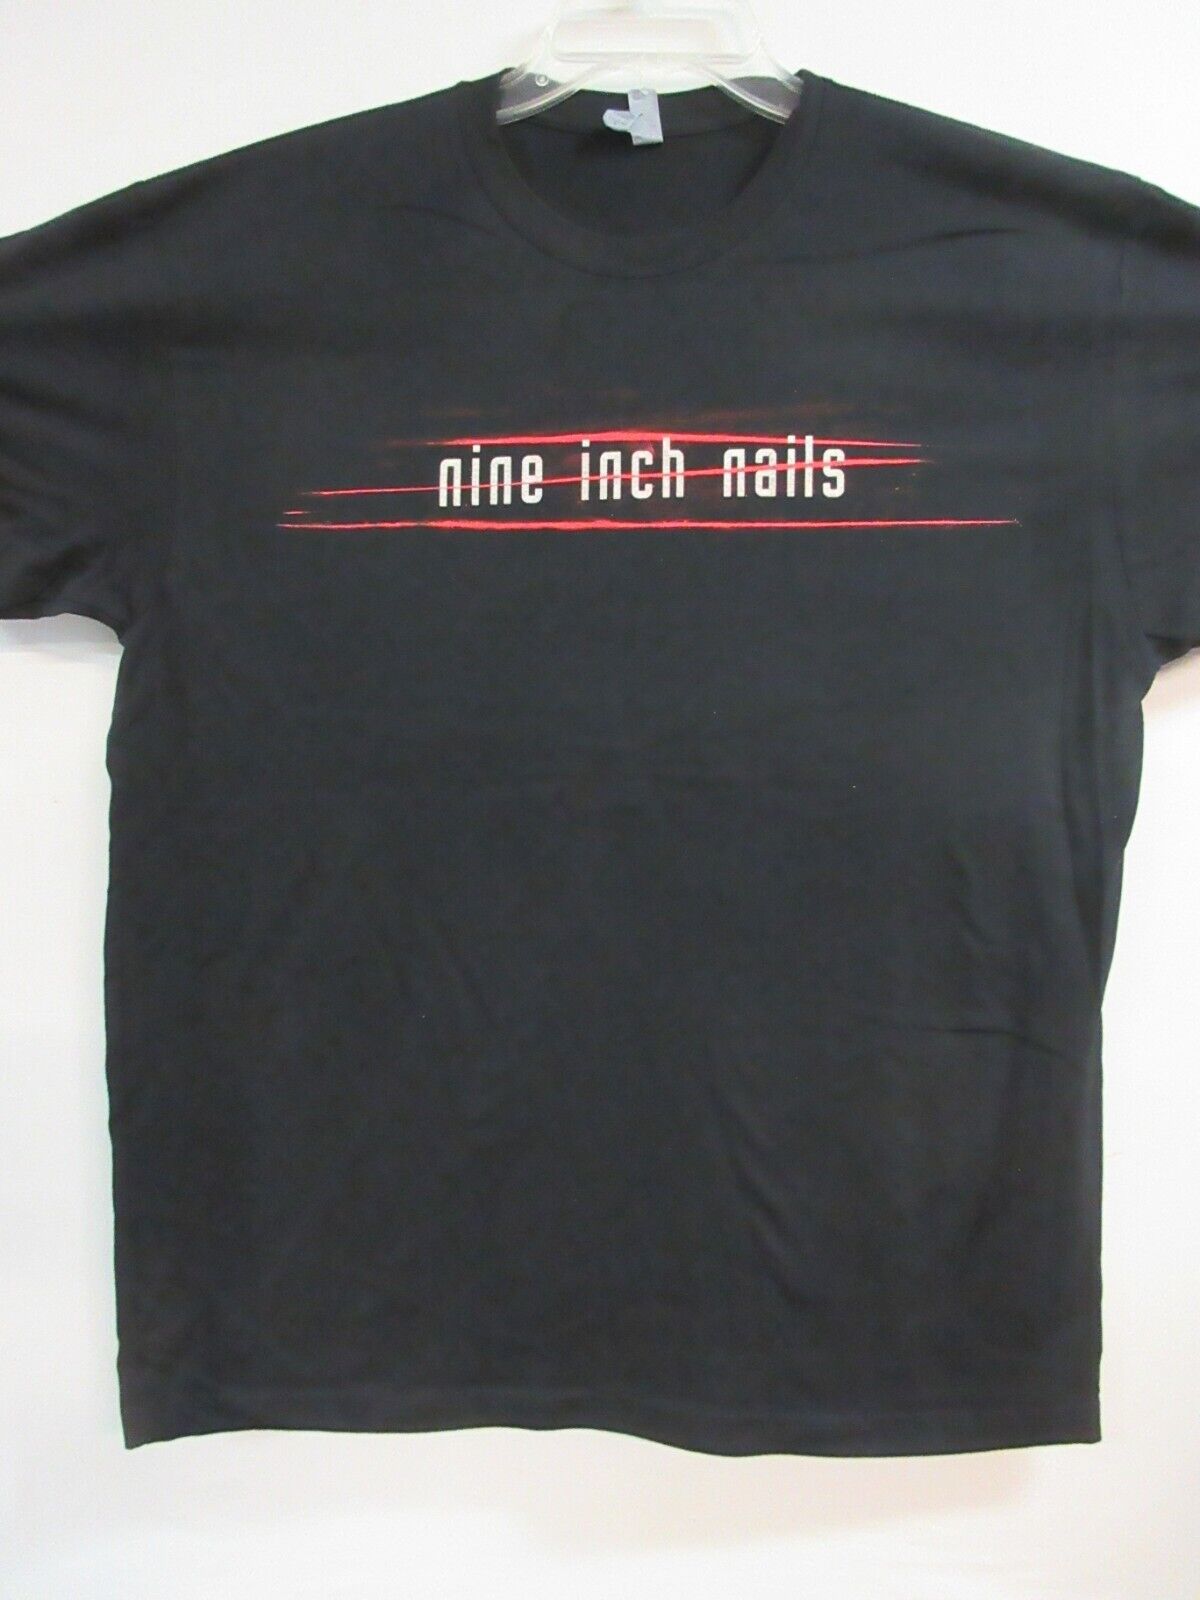 NINE INCH NAILS OFFICIAL OLD STOCK SCRATCHES BAND CONCERT MUSIC T-SHIRT MEDIUM